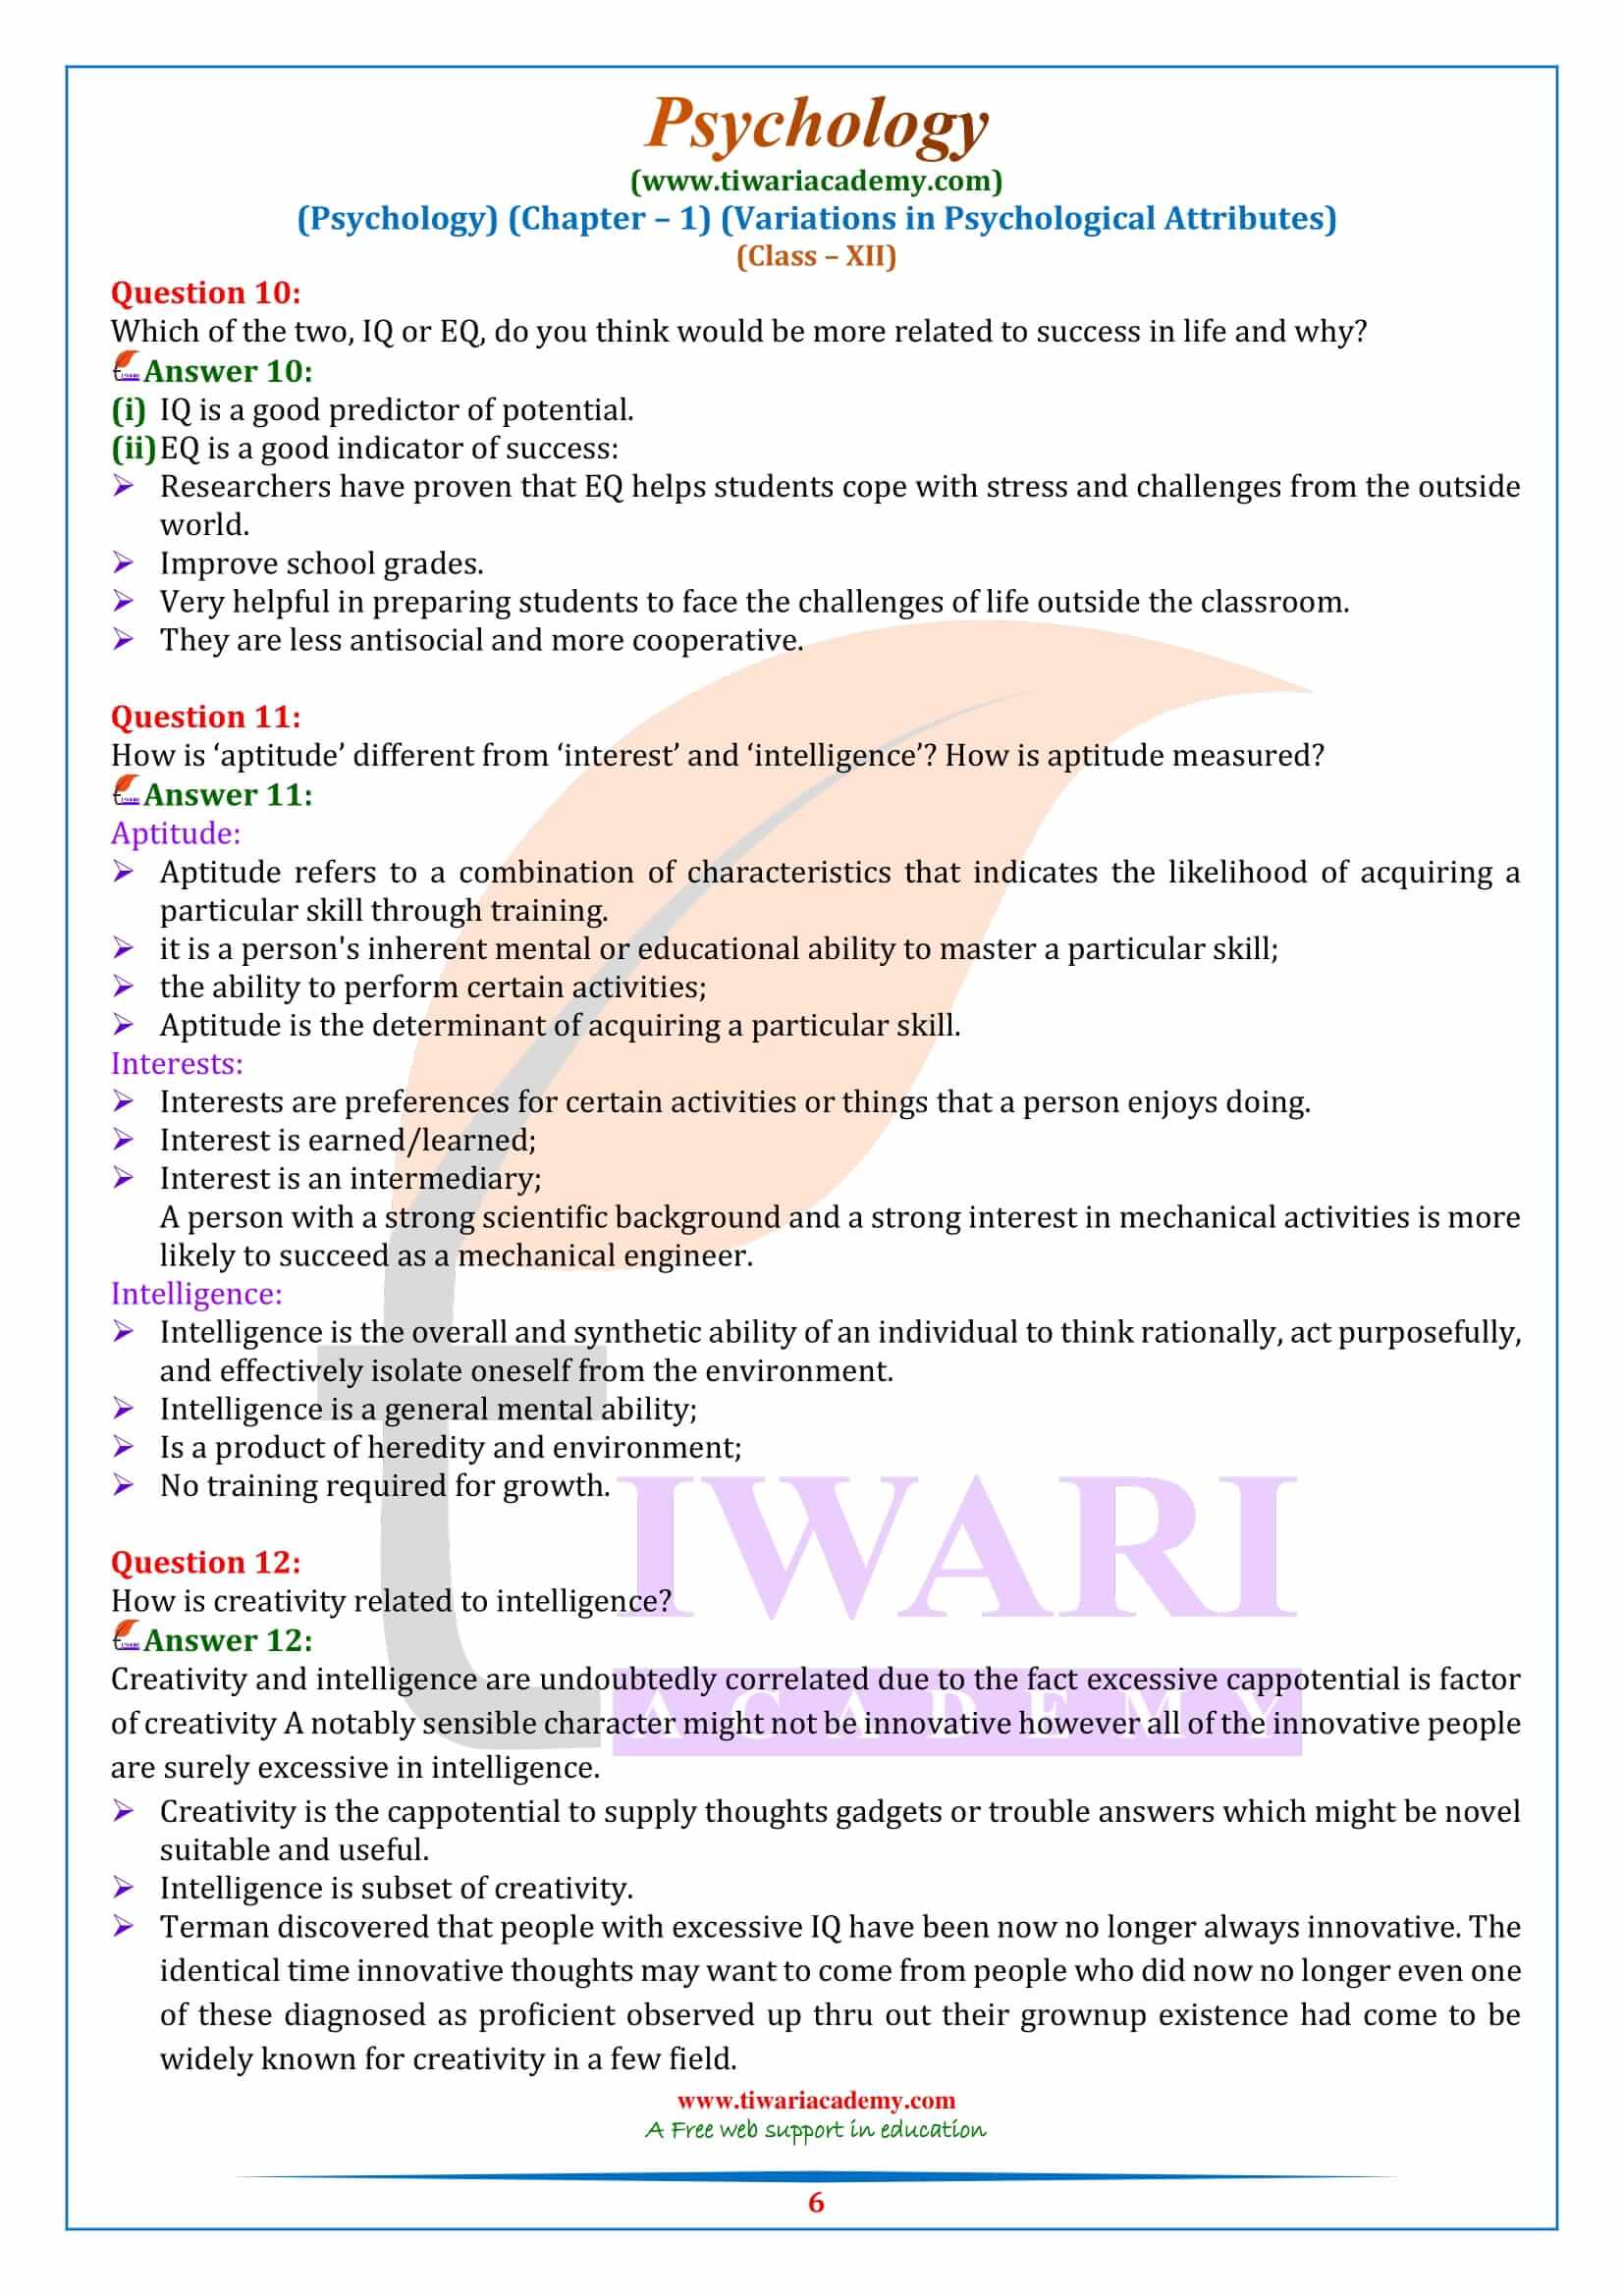 NCERT Solutions for Class 12 Psychology Chapter 1 exercises